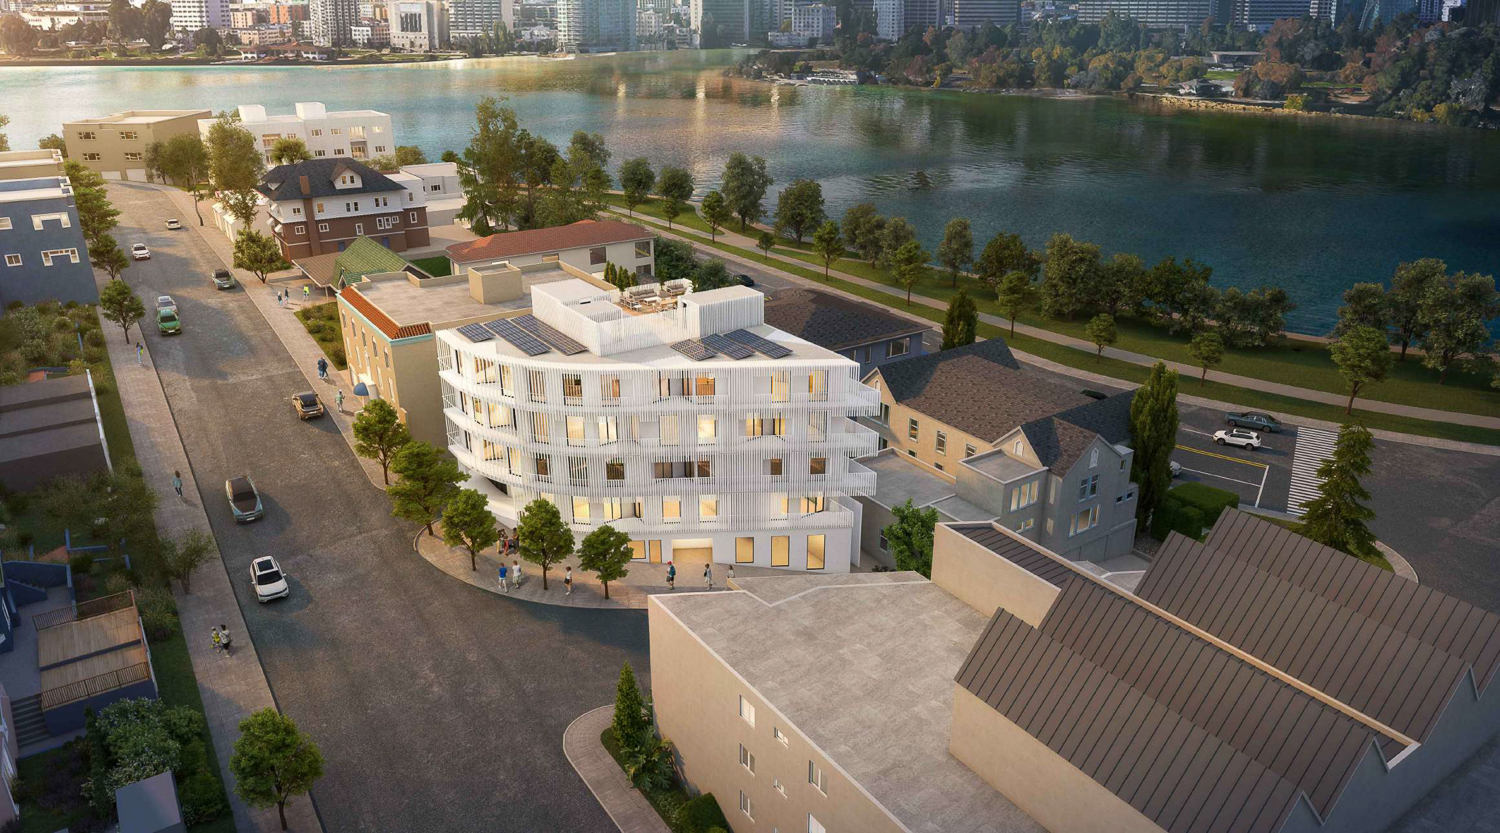 459 Wayne Avenue aerial view looking northwest, rendering by Larson Shores Architecture